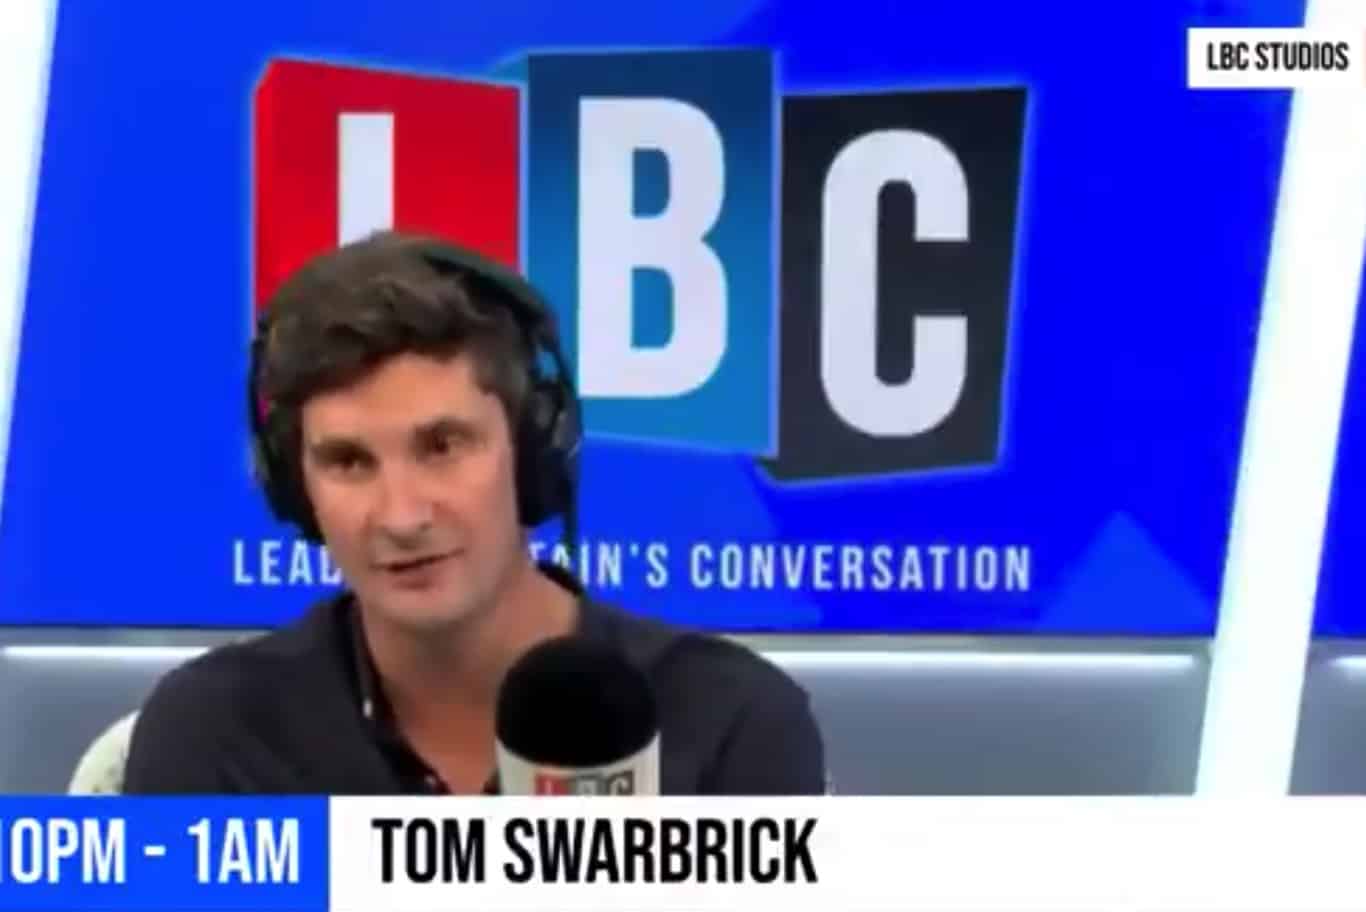 LBC presenter clashes with caller who says pets should be prioritised in Afghan evacuation